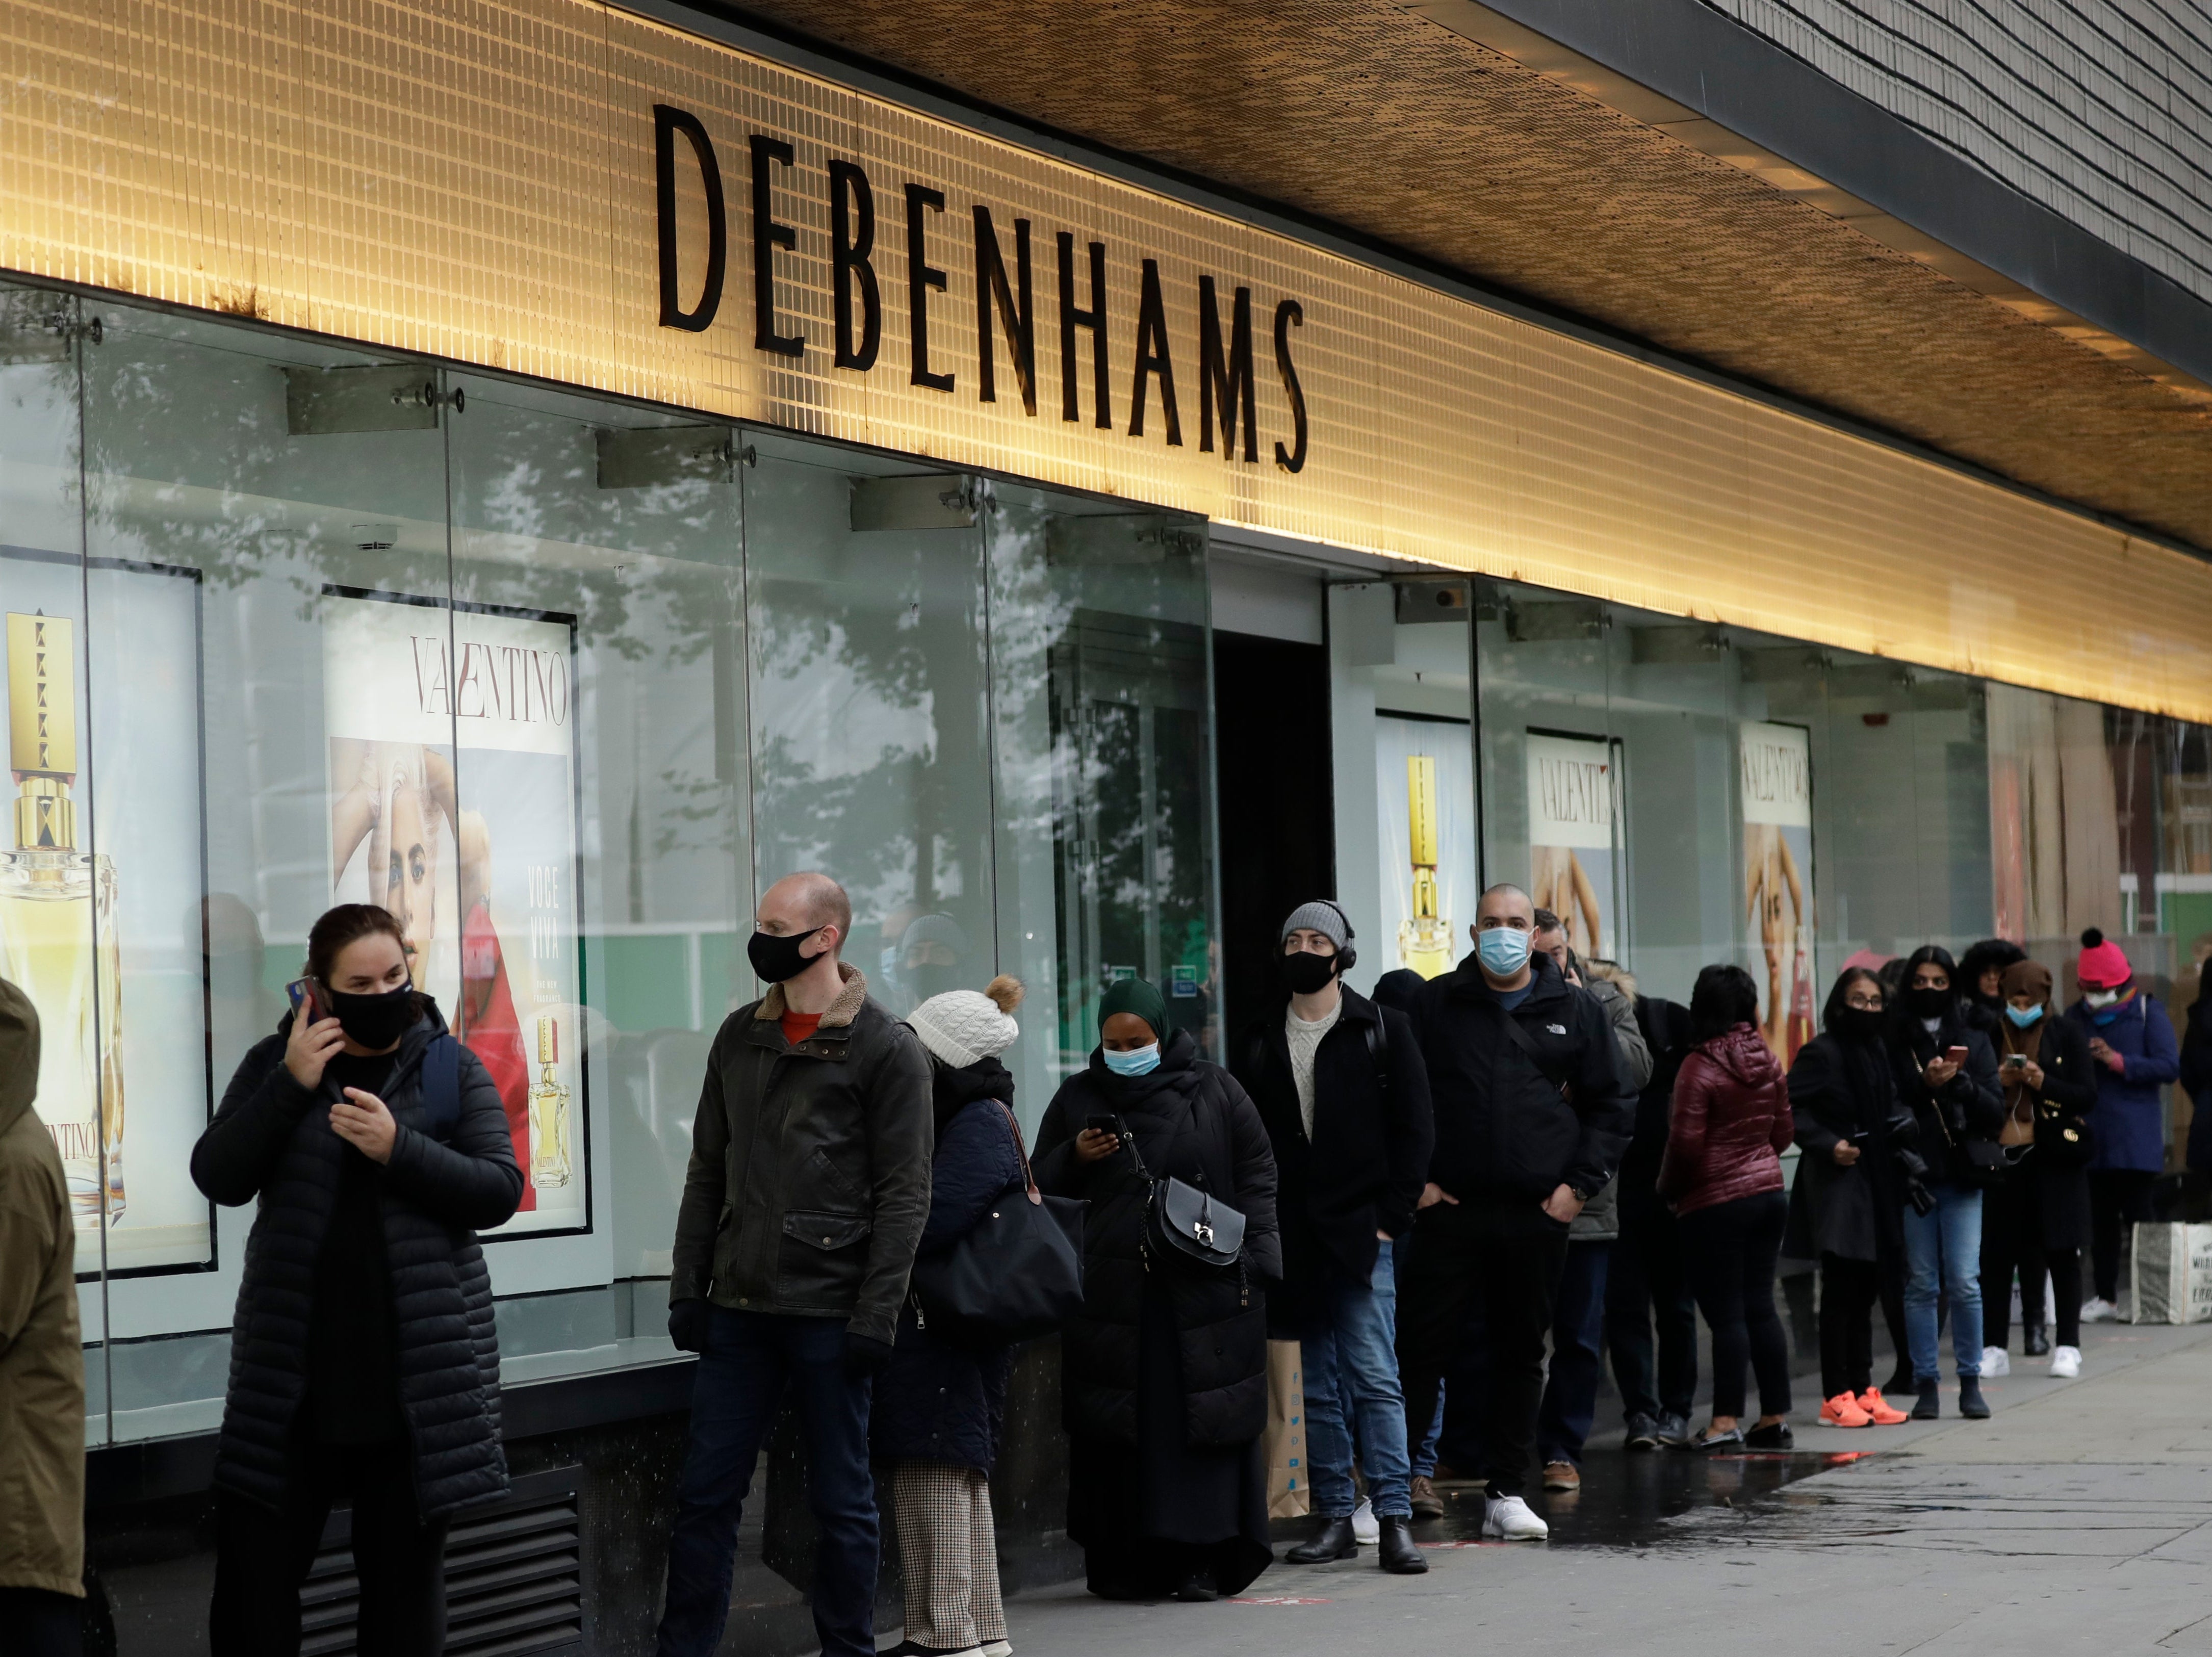 People queue outside the Debenhams department store, which is expected to close down, on London’s Oxford Street